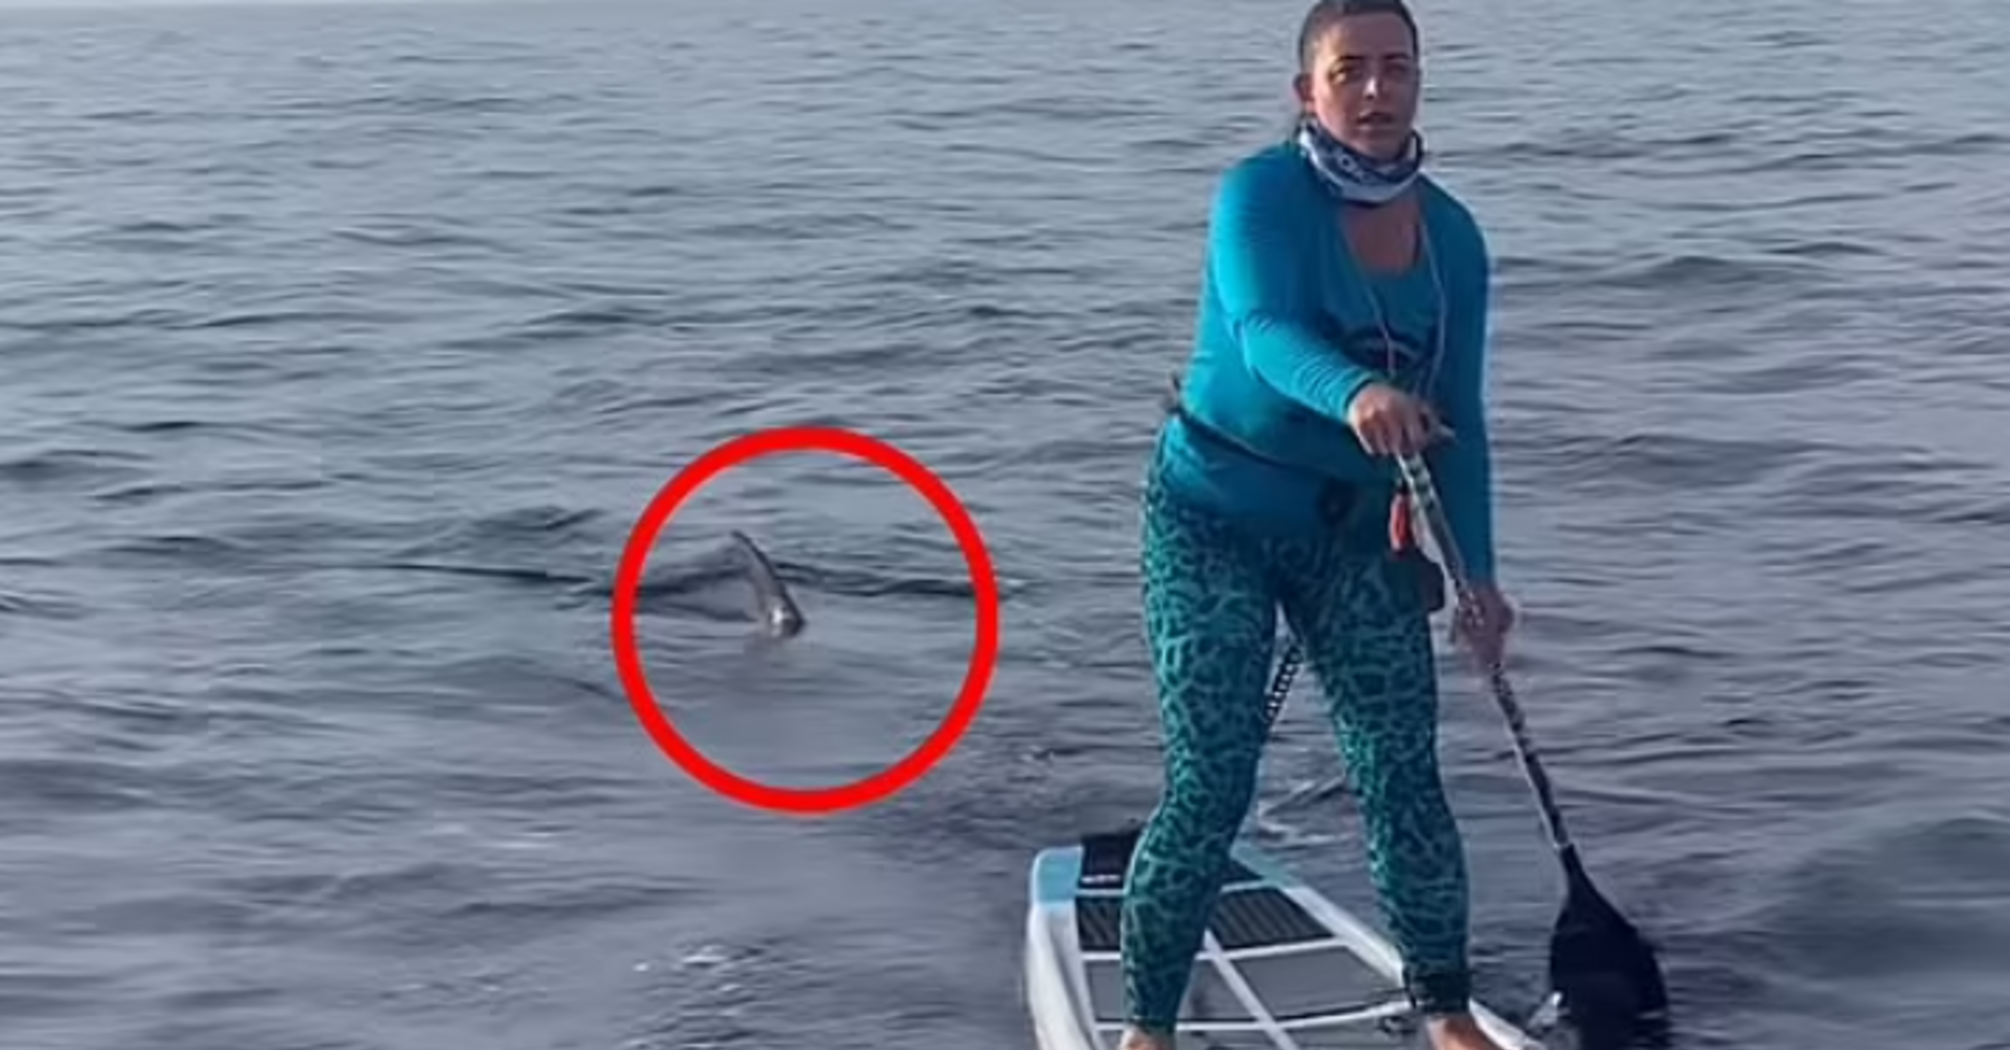 A hammerhead shark rounded up paddlers off the coast of Florida